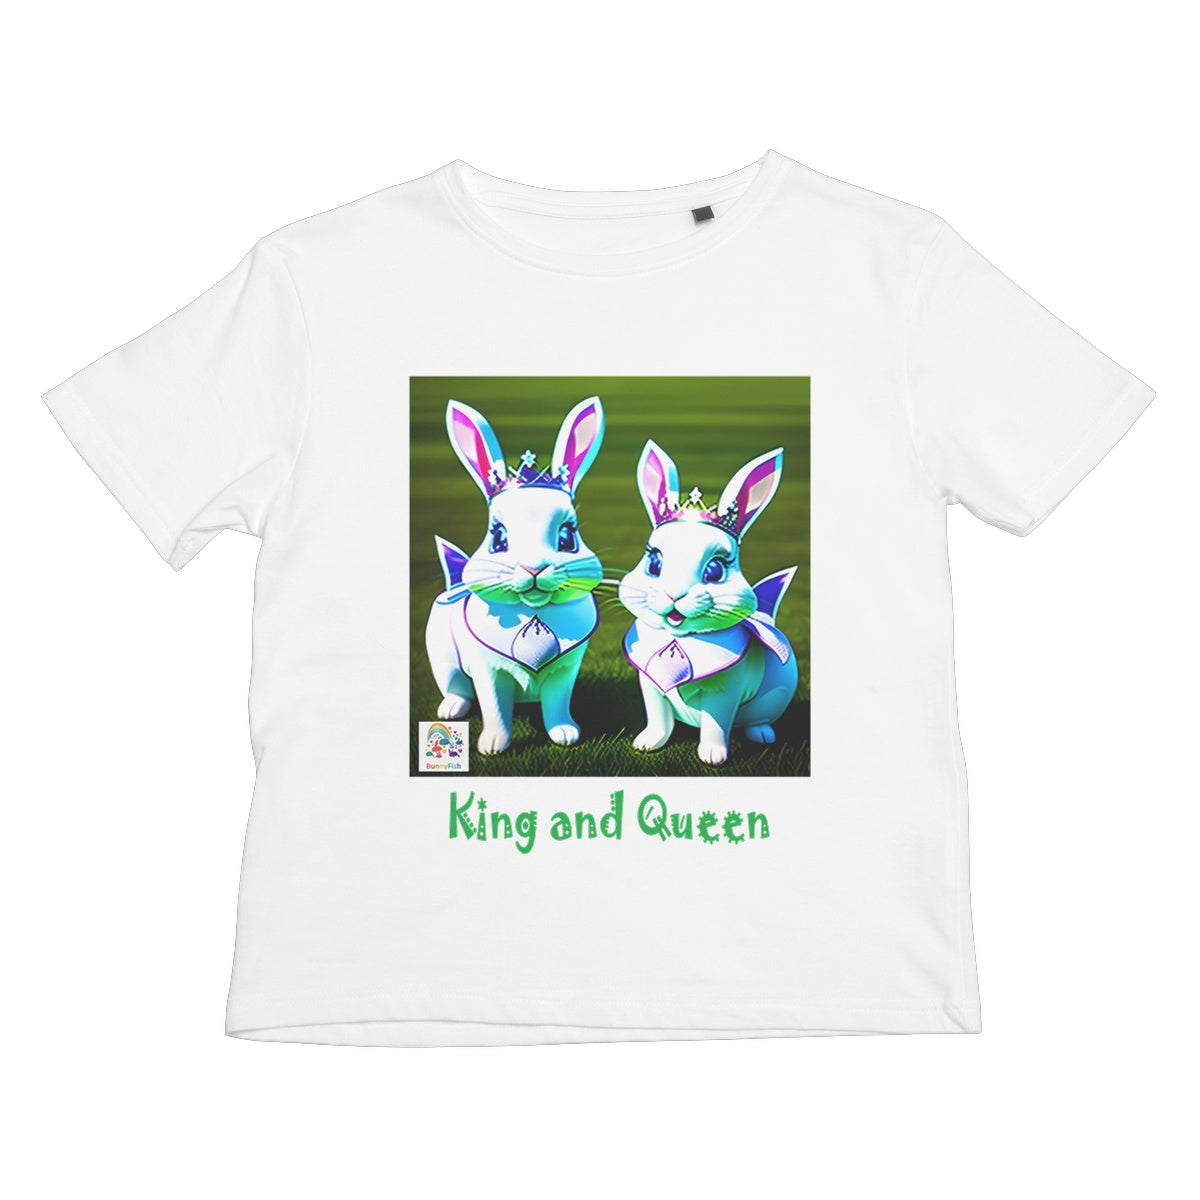 King and Queen Kids' T-Shirt